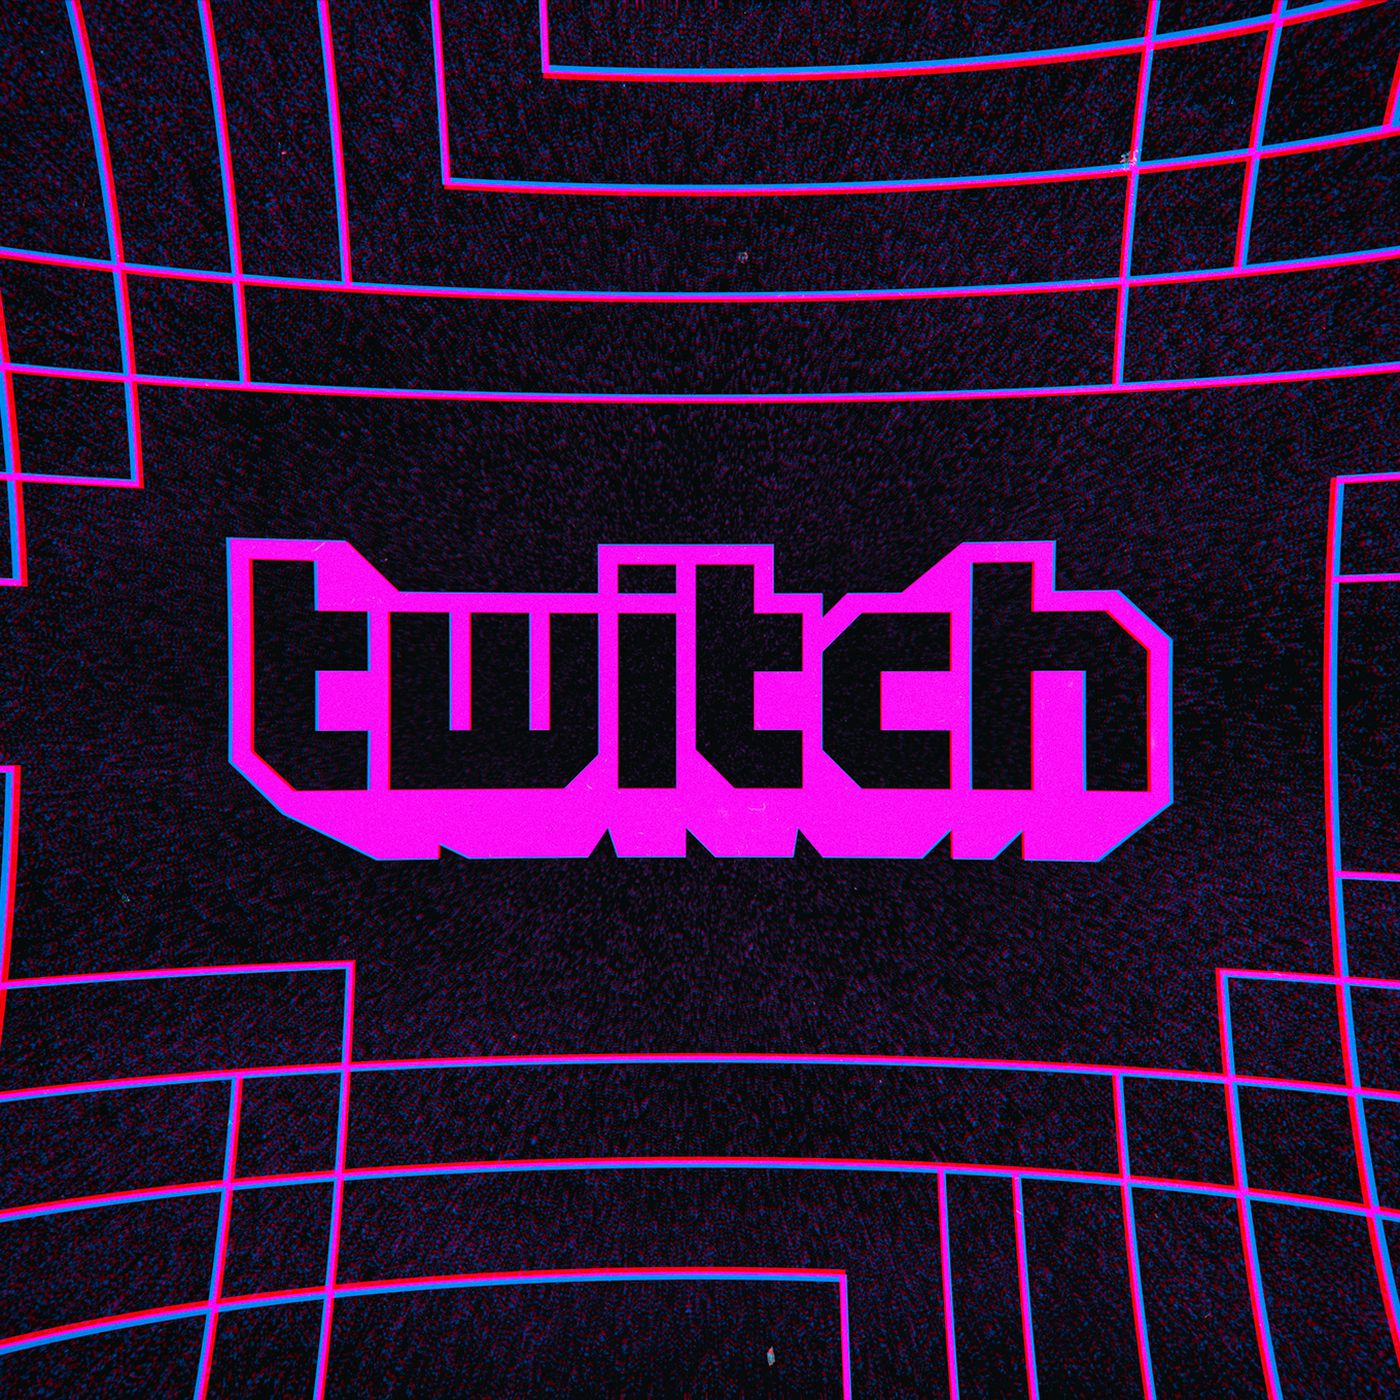 eMarketer forecast predicts Twitch will surpass 40 million active users next year. Image via The Verge.